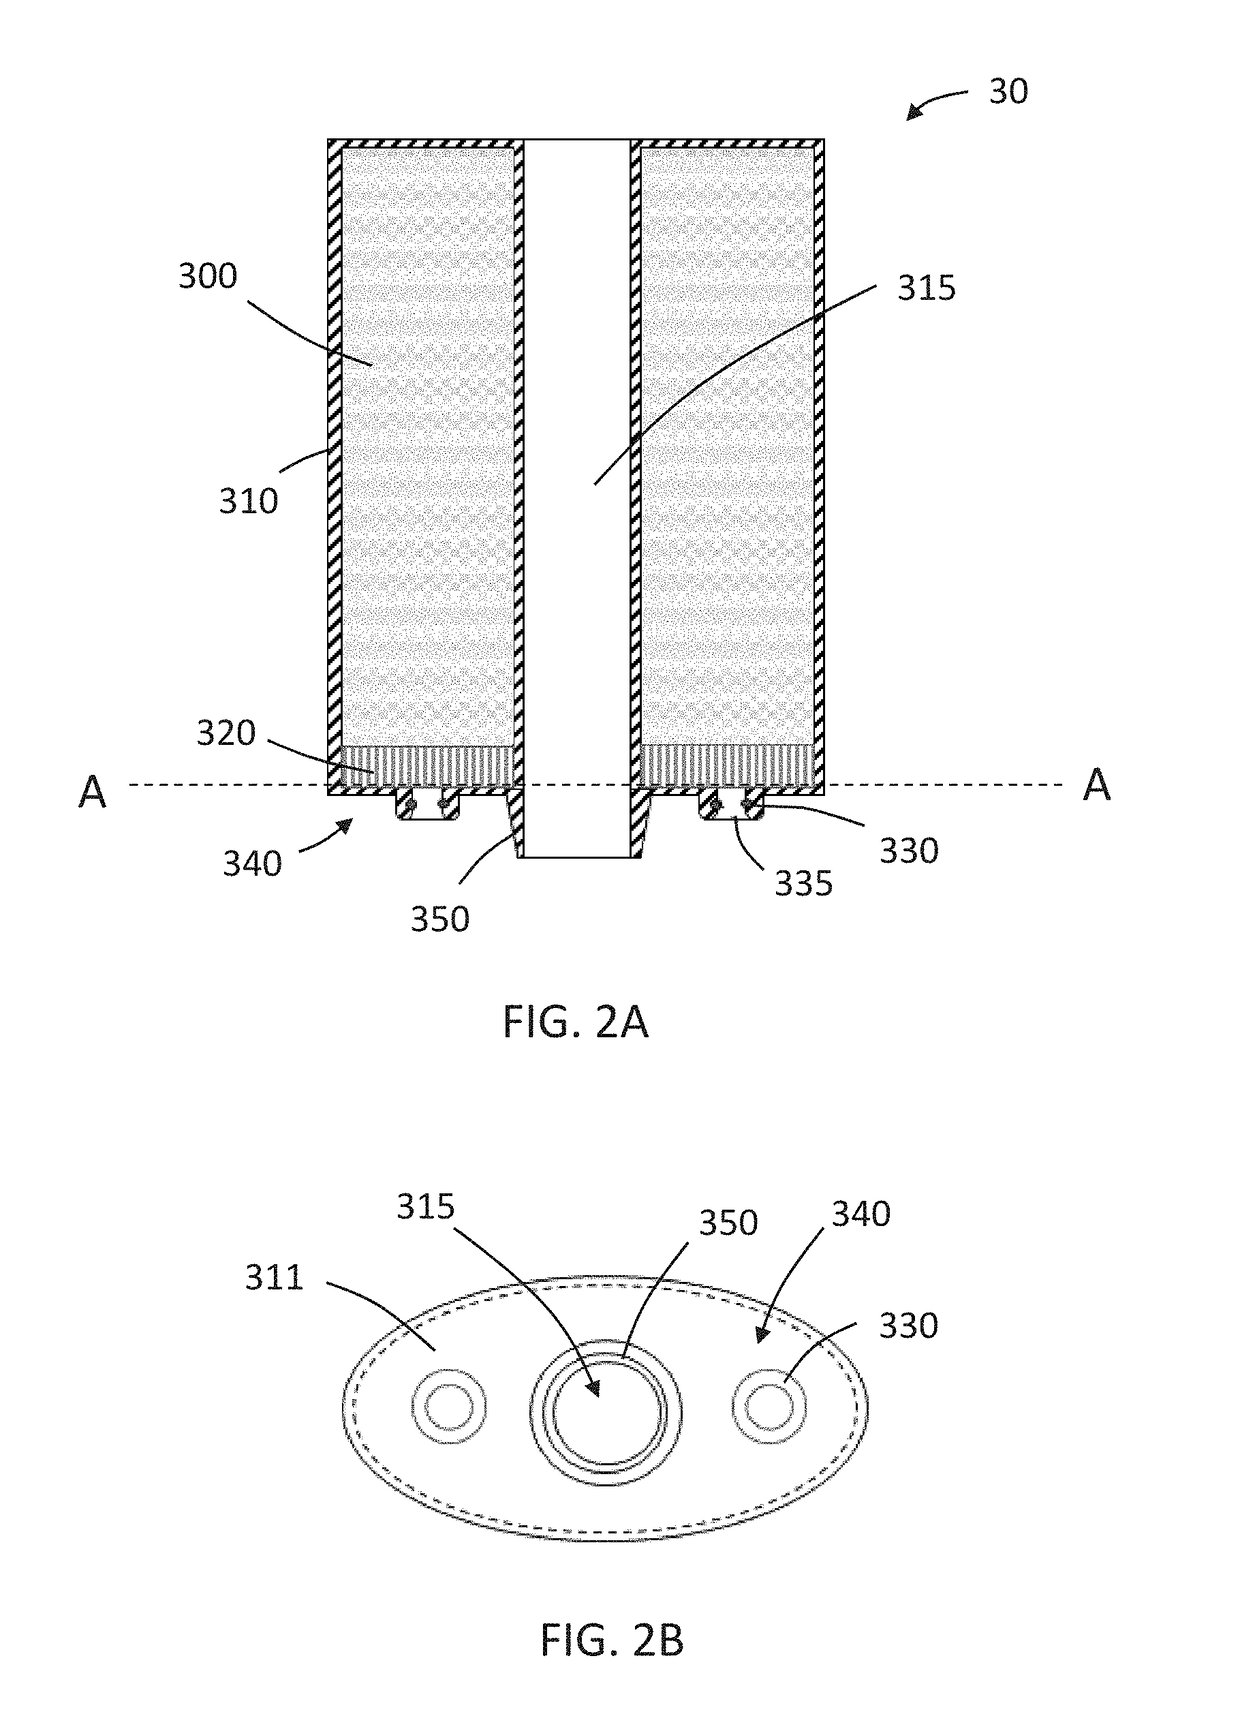 Aerosol-generating system with separate capsule and vaporizer